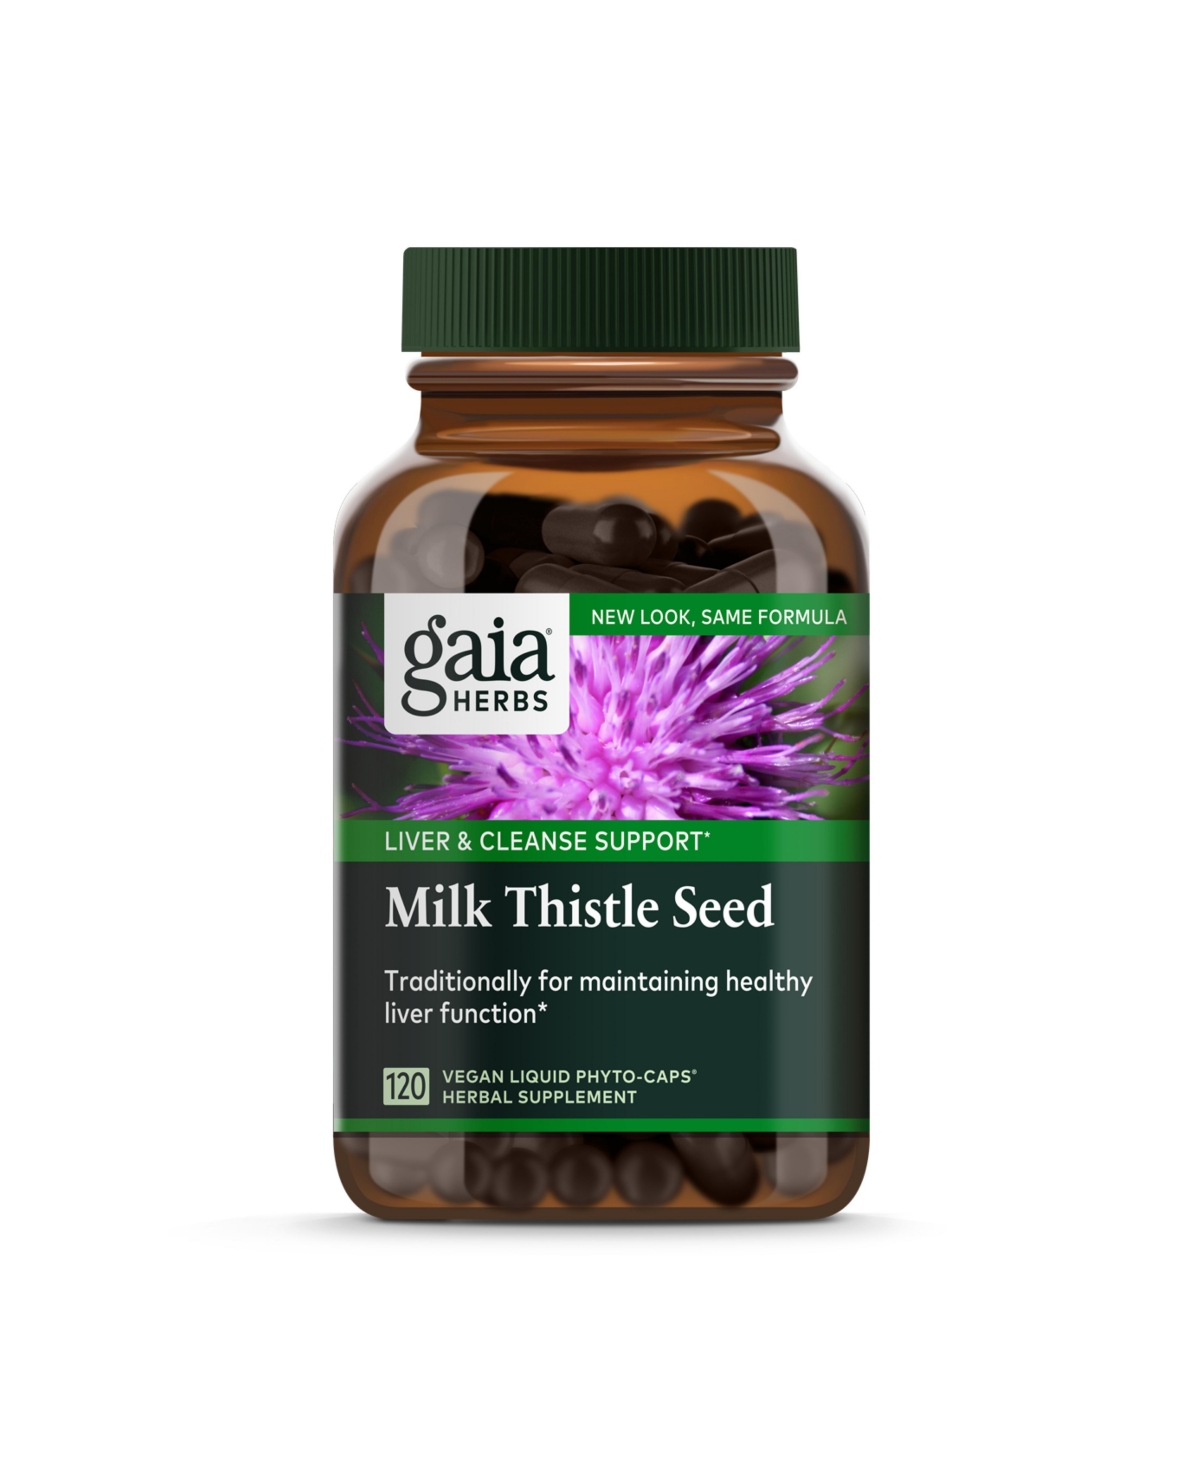 Milk Thistle Seed - Liver Supplement & Cleanse Support for Maintaining Healthy Liver Function - With Milk Thistle Seed Extract - 120 Liquid